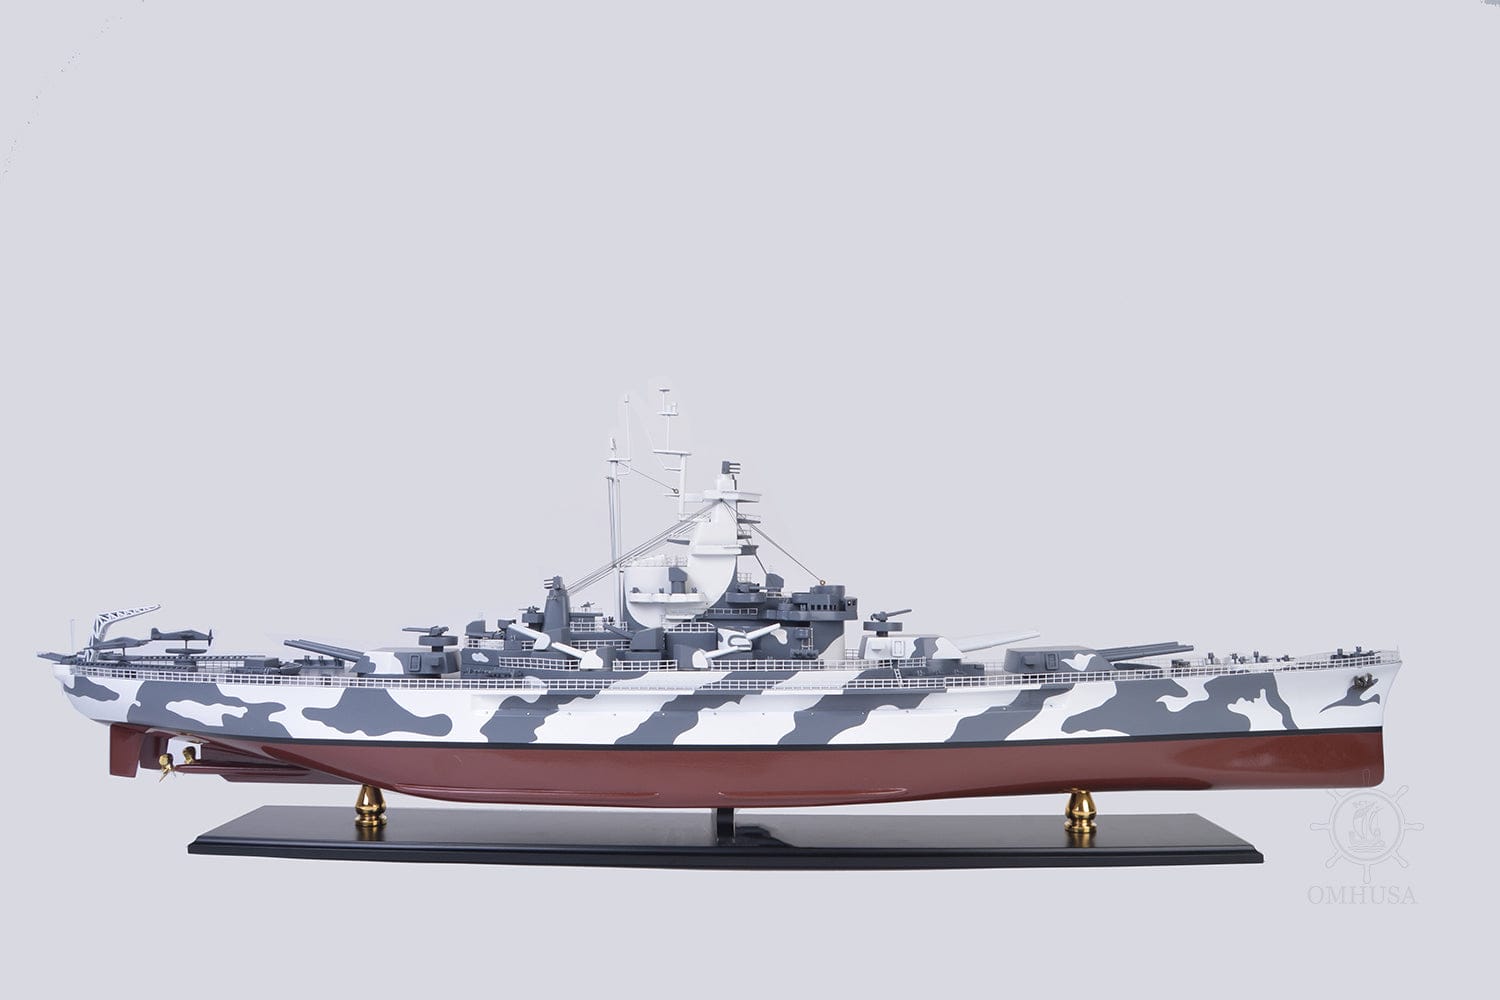 ALDO Hobbies & Creative Arts > Collectibles > Scale Models L: 42.5 W: 7 H: 15.75 Inches / NEW / wood USS Alabama BB-60 Battleship Warship Exclusive Edition XLarge Camouflage Model  Assembled